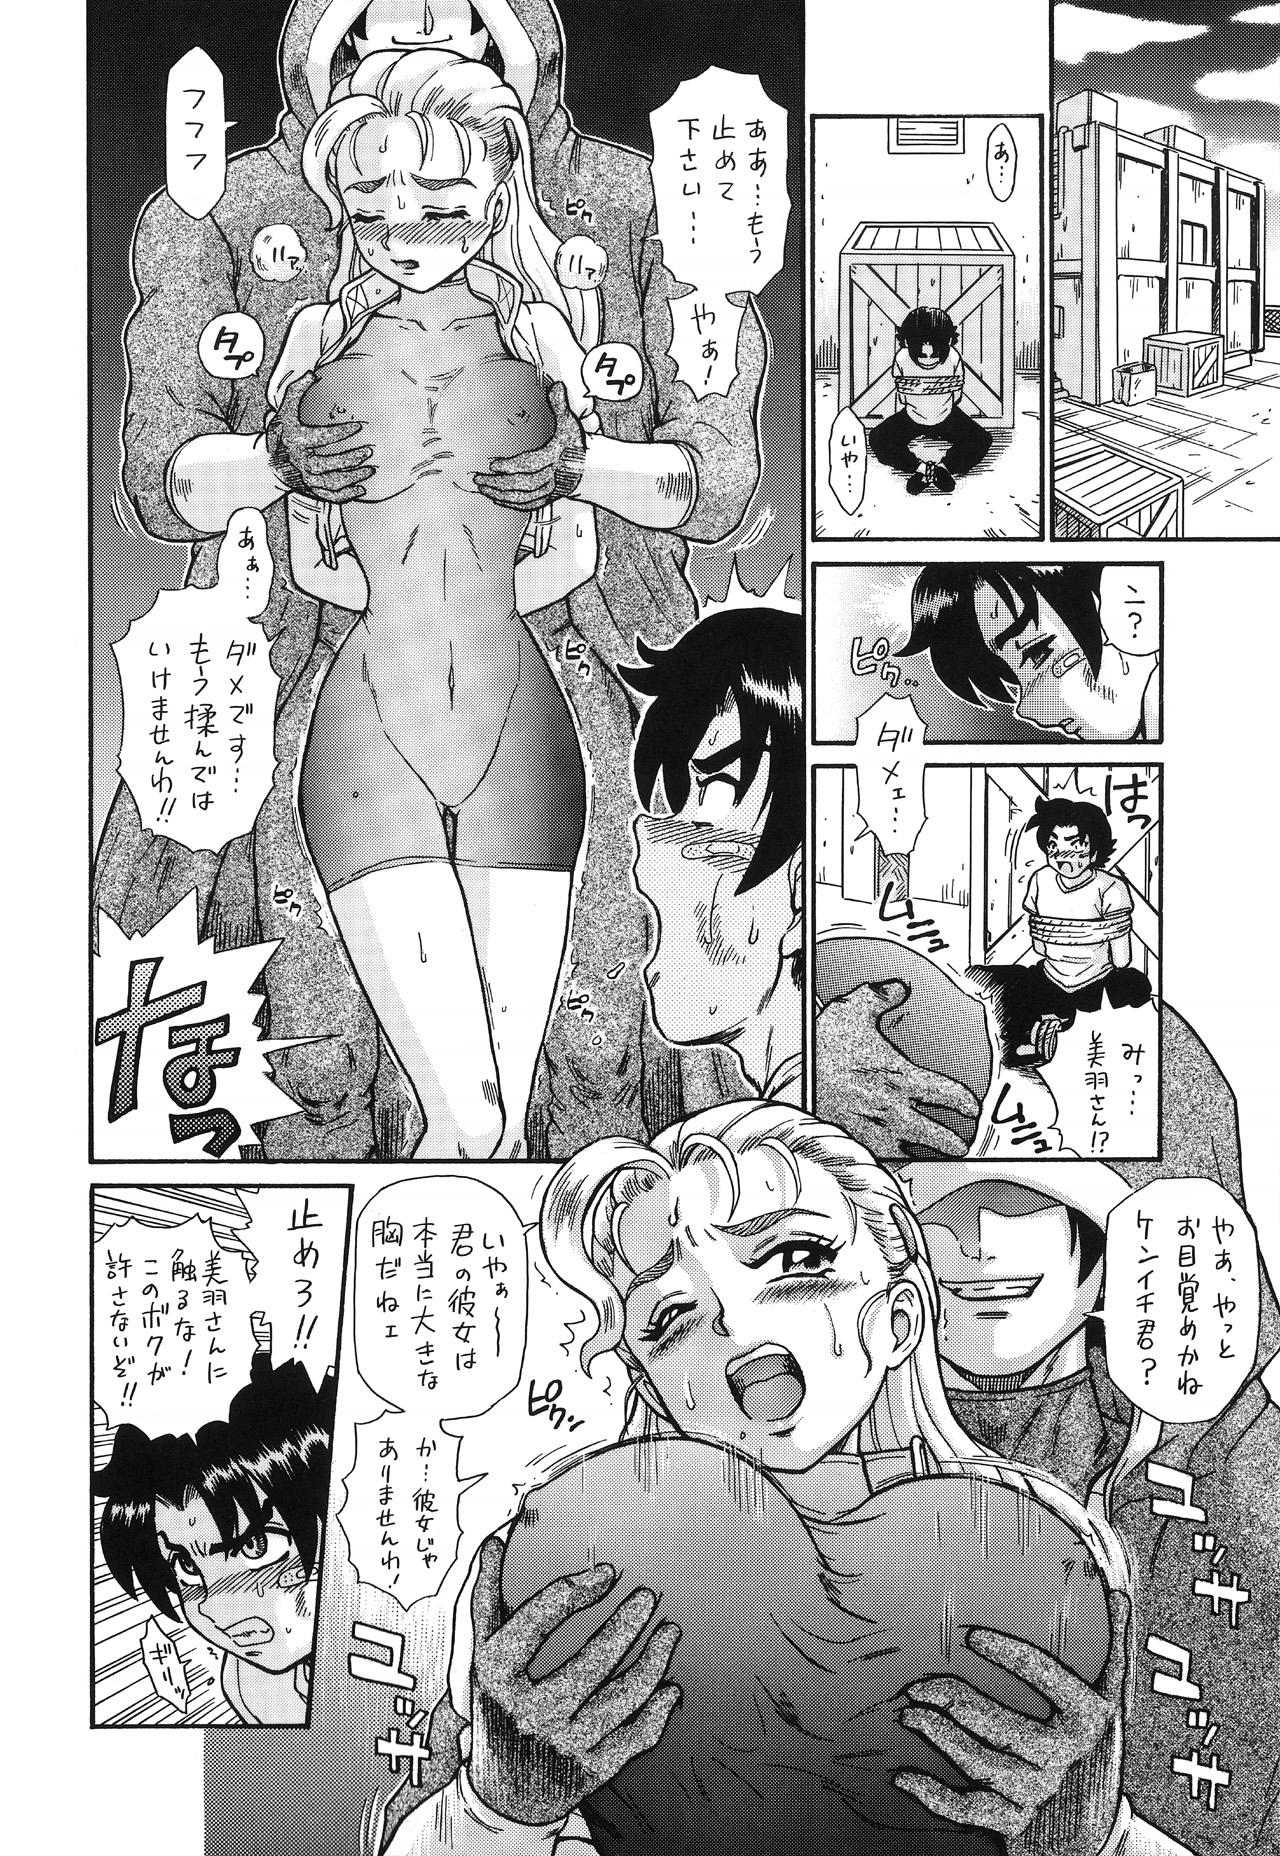 Cams TAIL-MAN MIU FUURINNZI BOOK - Historys strongest disciple kenichi Perverted - Page 5